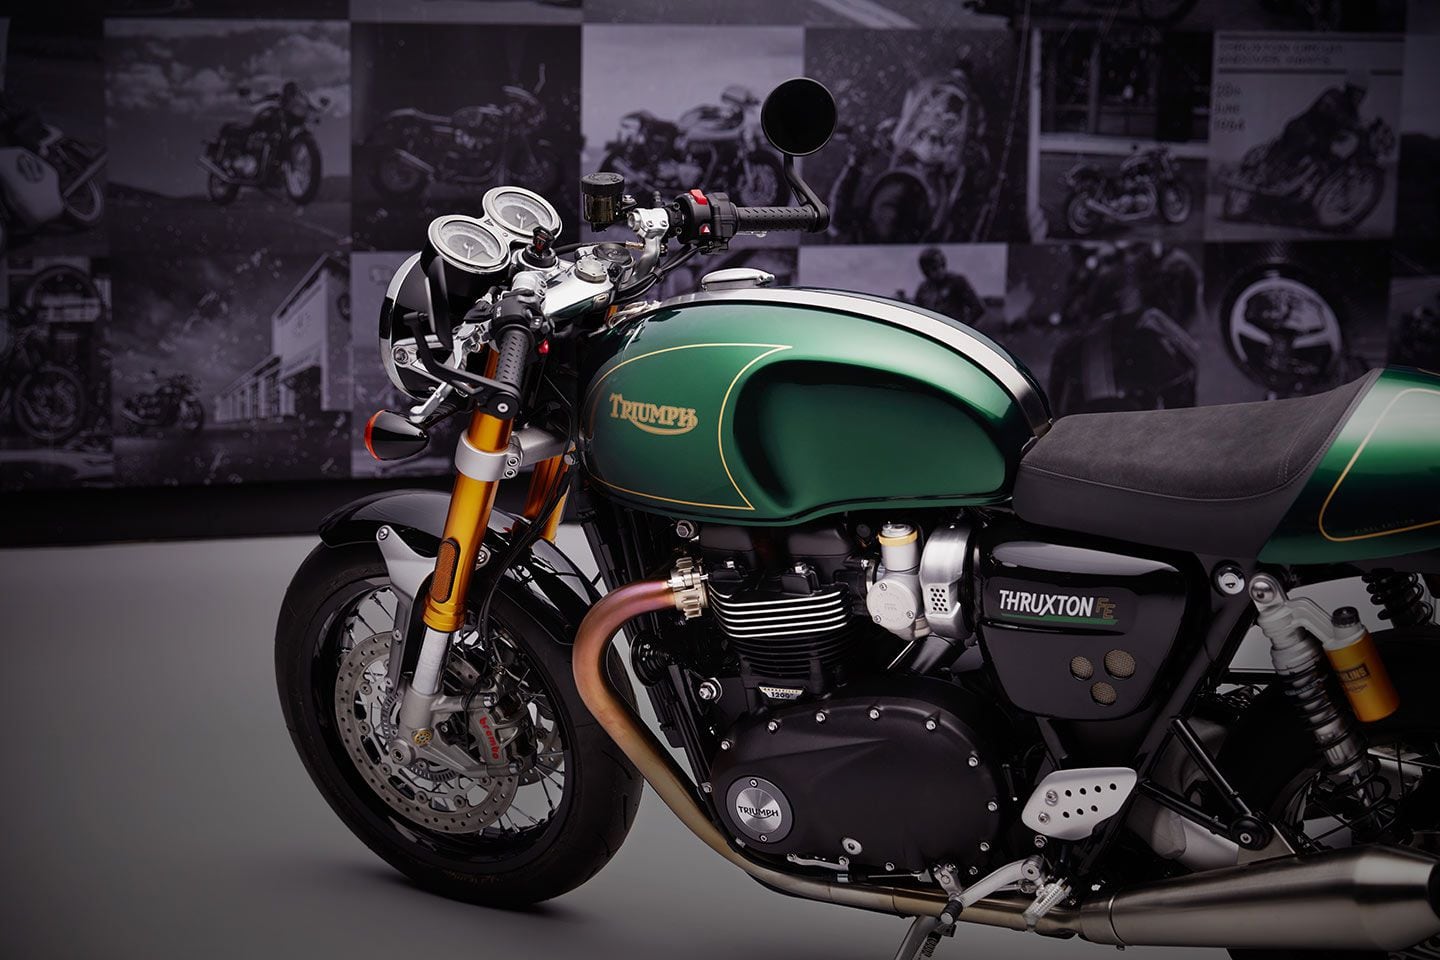 Power is from the 1,200cc version of the Bonneville parallel twin that produces a claimed 105 hp.